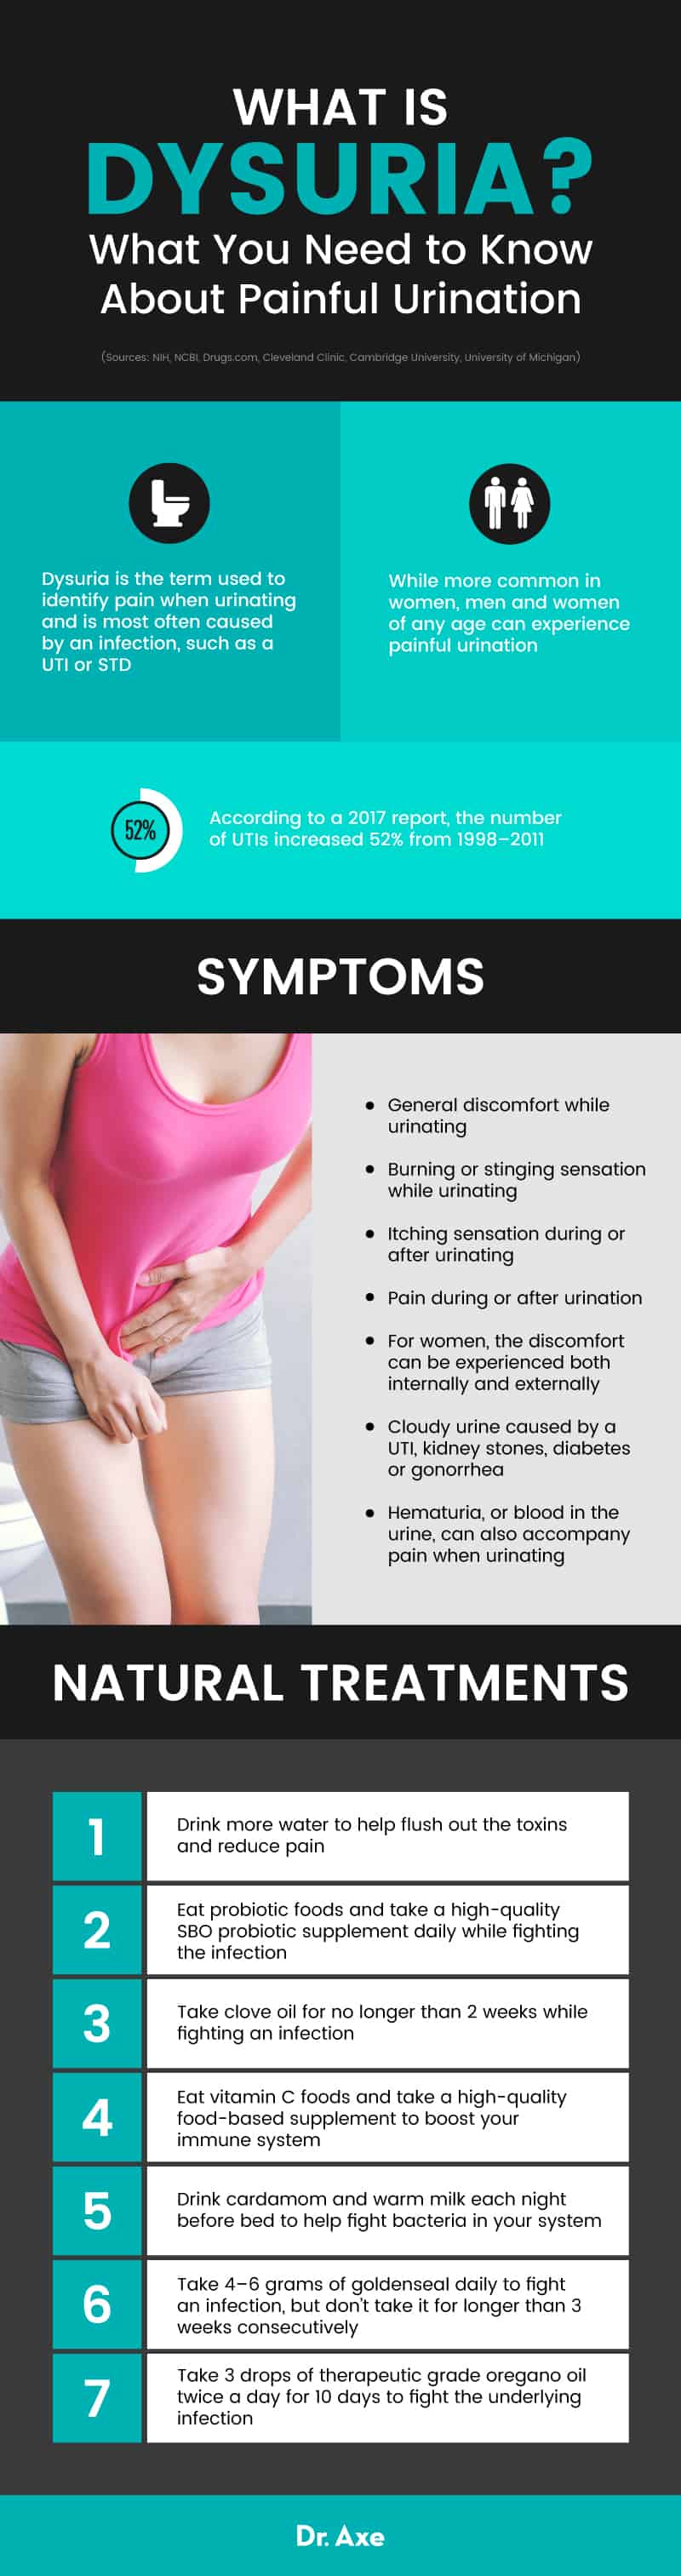 Dysuria or painful urination treatment - Dr. Axe